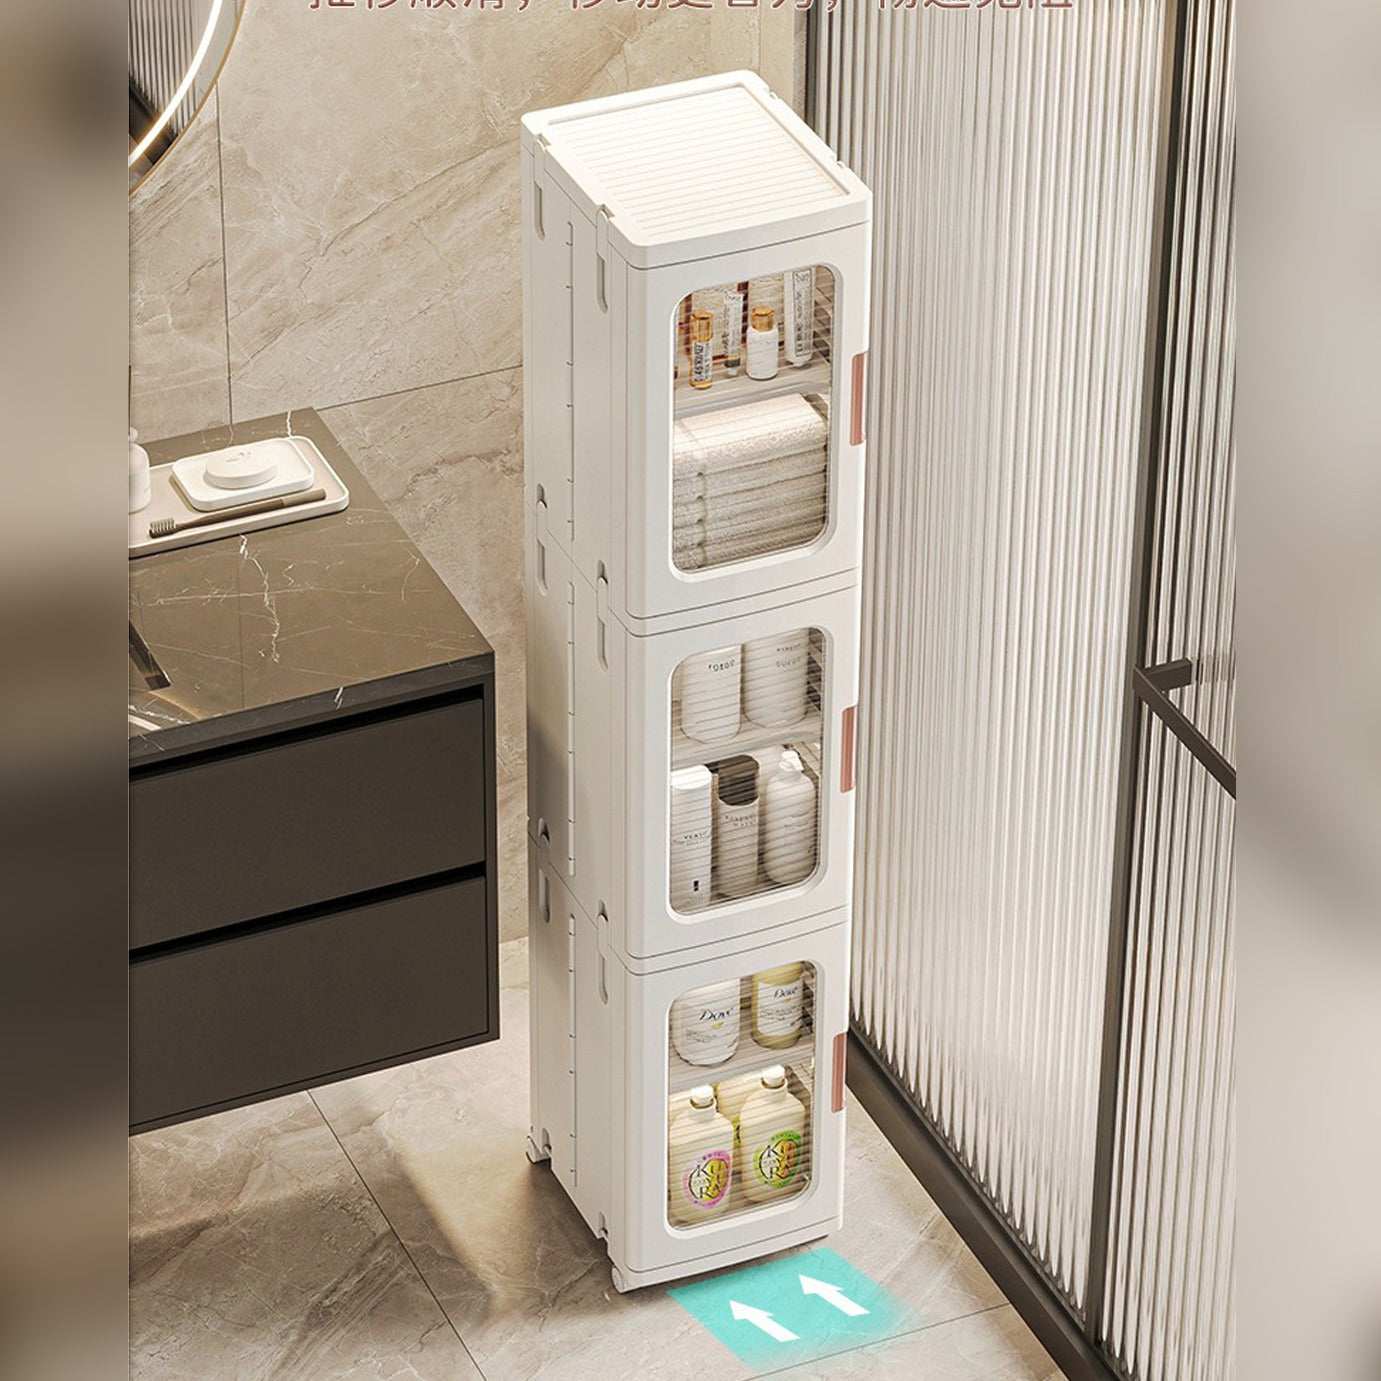 Narrow Tall Floor Storage Cabinet placed in the bathroom